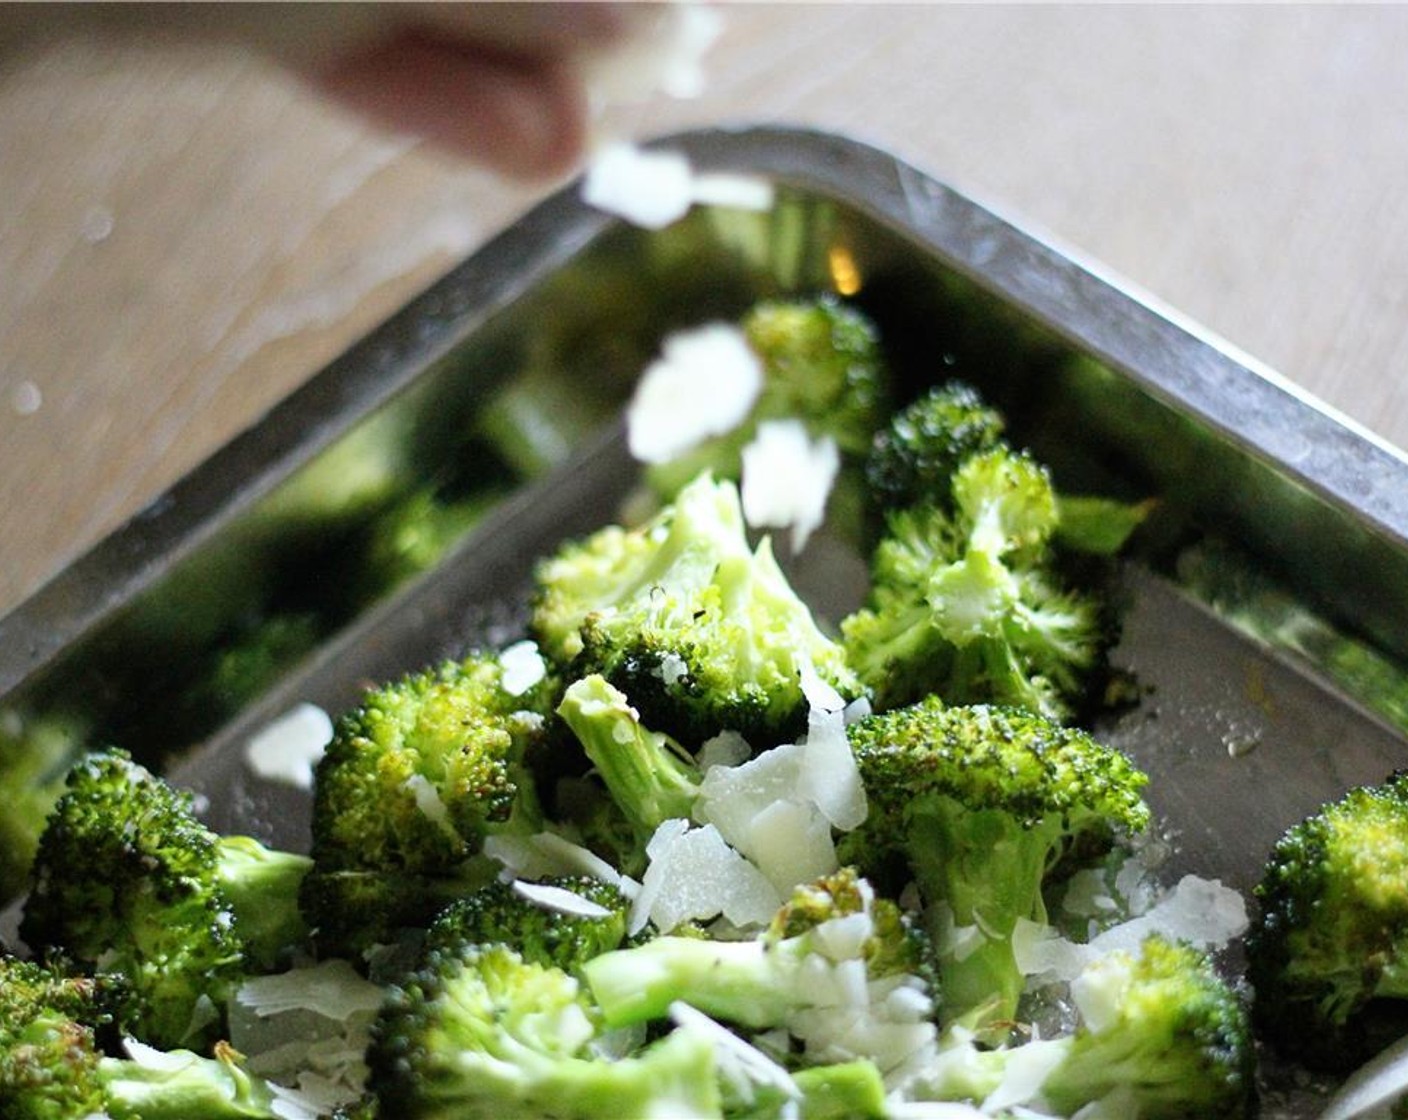 step 6 While steaks are cooking, transfer seasoned broccoli to an oven safe baking sheet or pan and bake for 10-12 minutes, or until broccoli is tender. Remove from oven and sprinkle with the Parmesan Cheese (1/4 cup) while still warm.